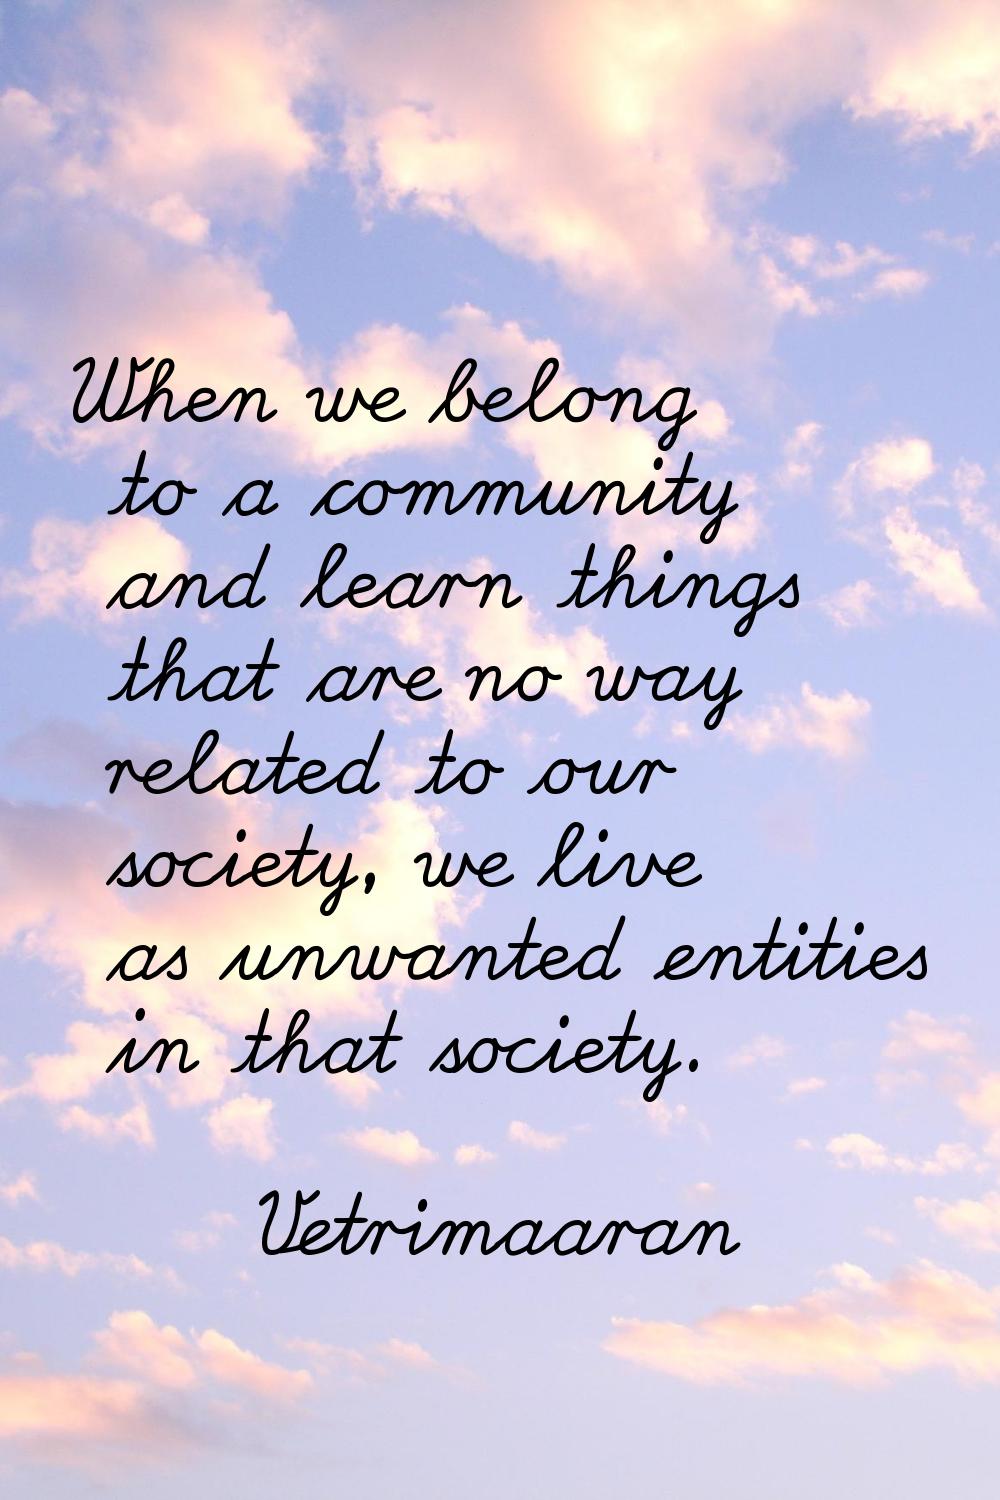 When we belong to a community and learn things that are no way related to our society, we live as u